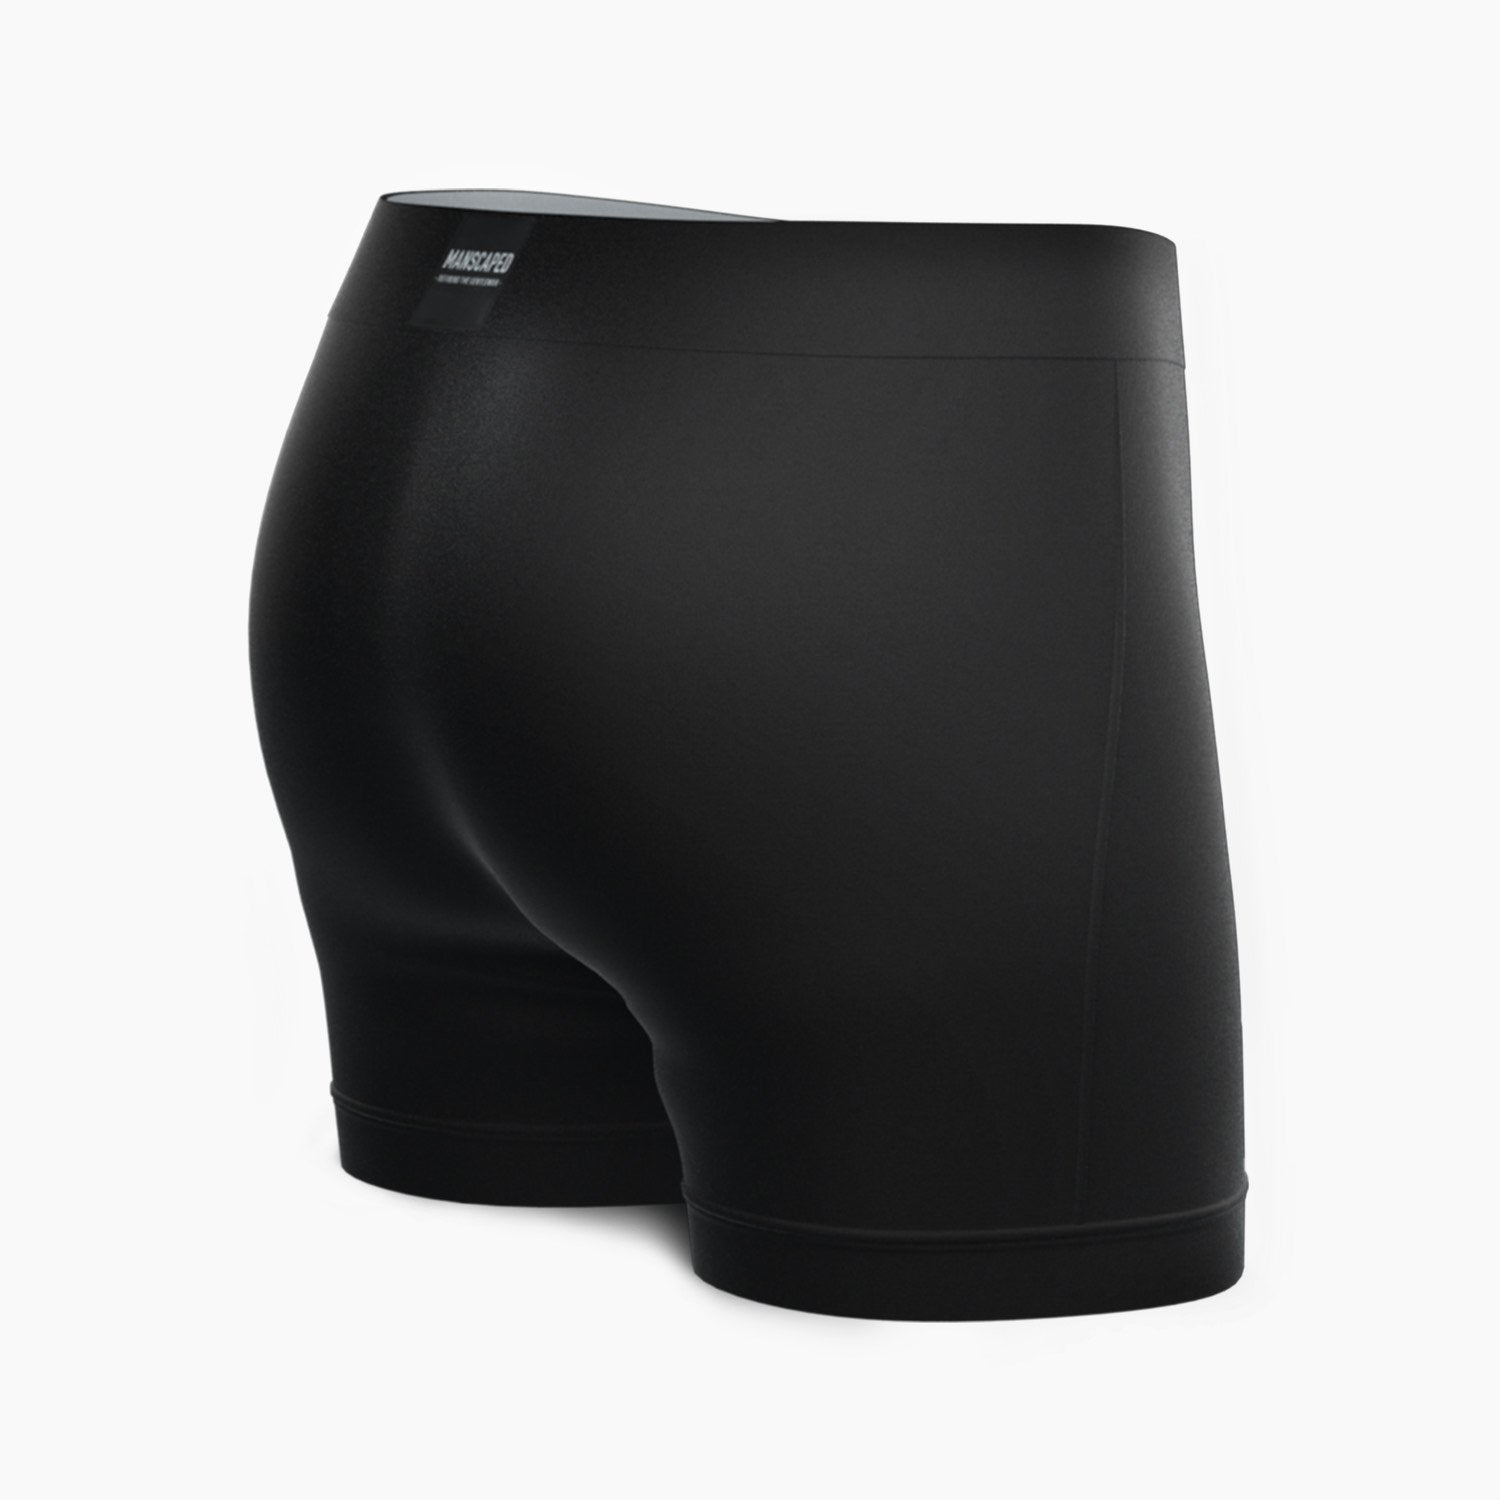 MANSCAPED™ BOXERS – 5econds123123214.co